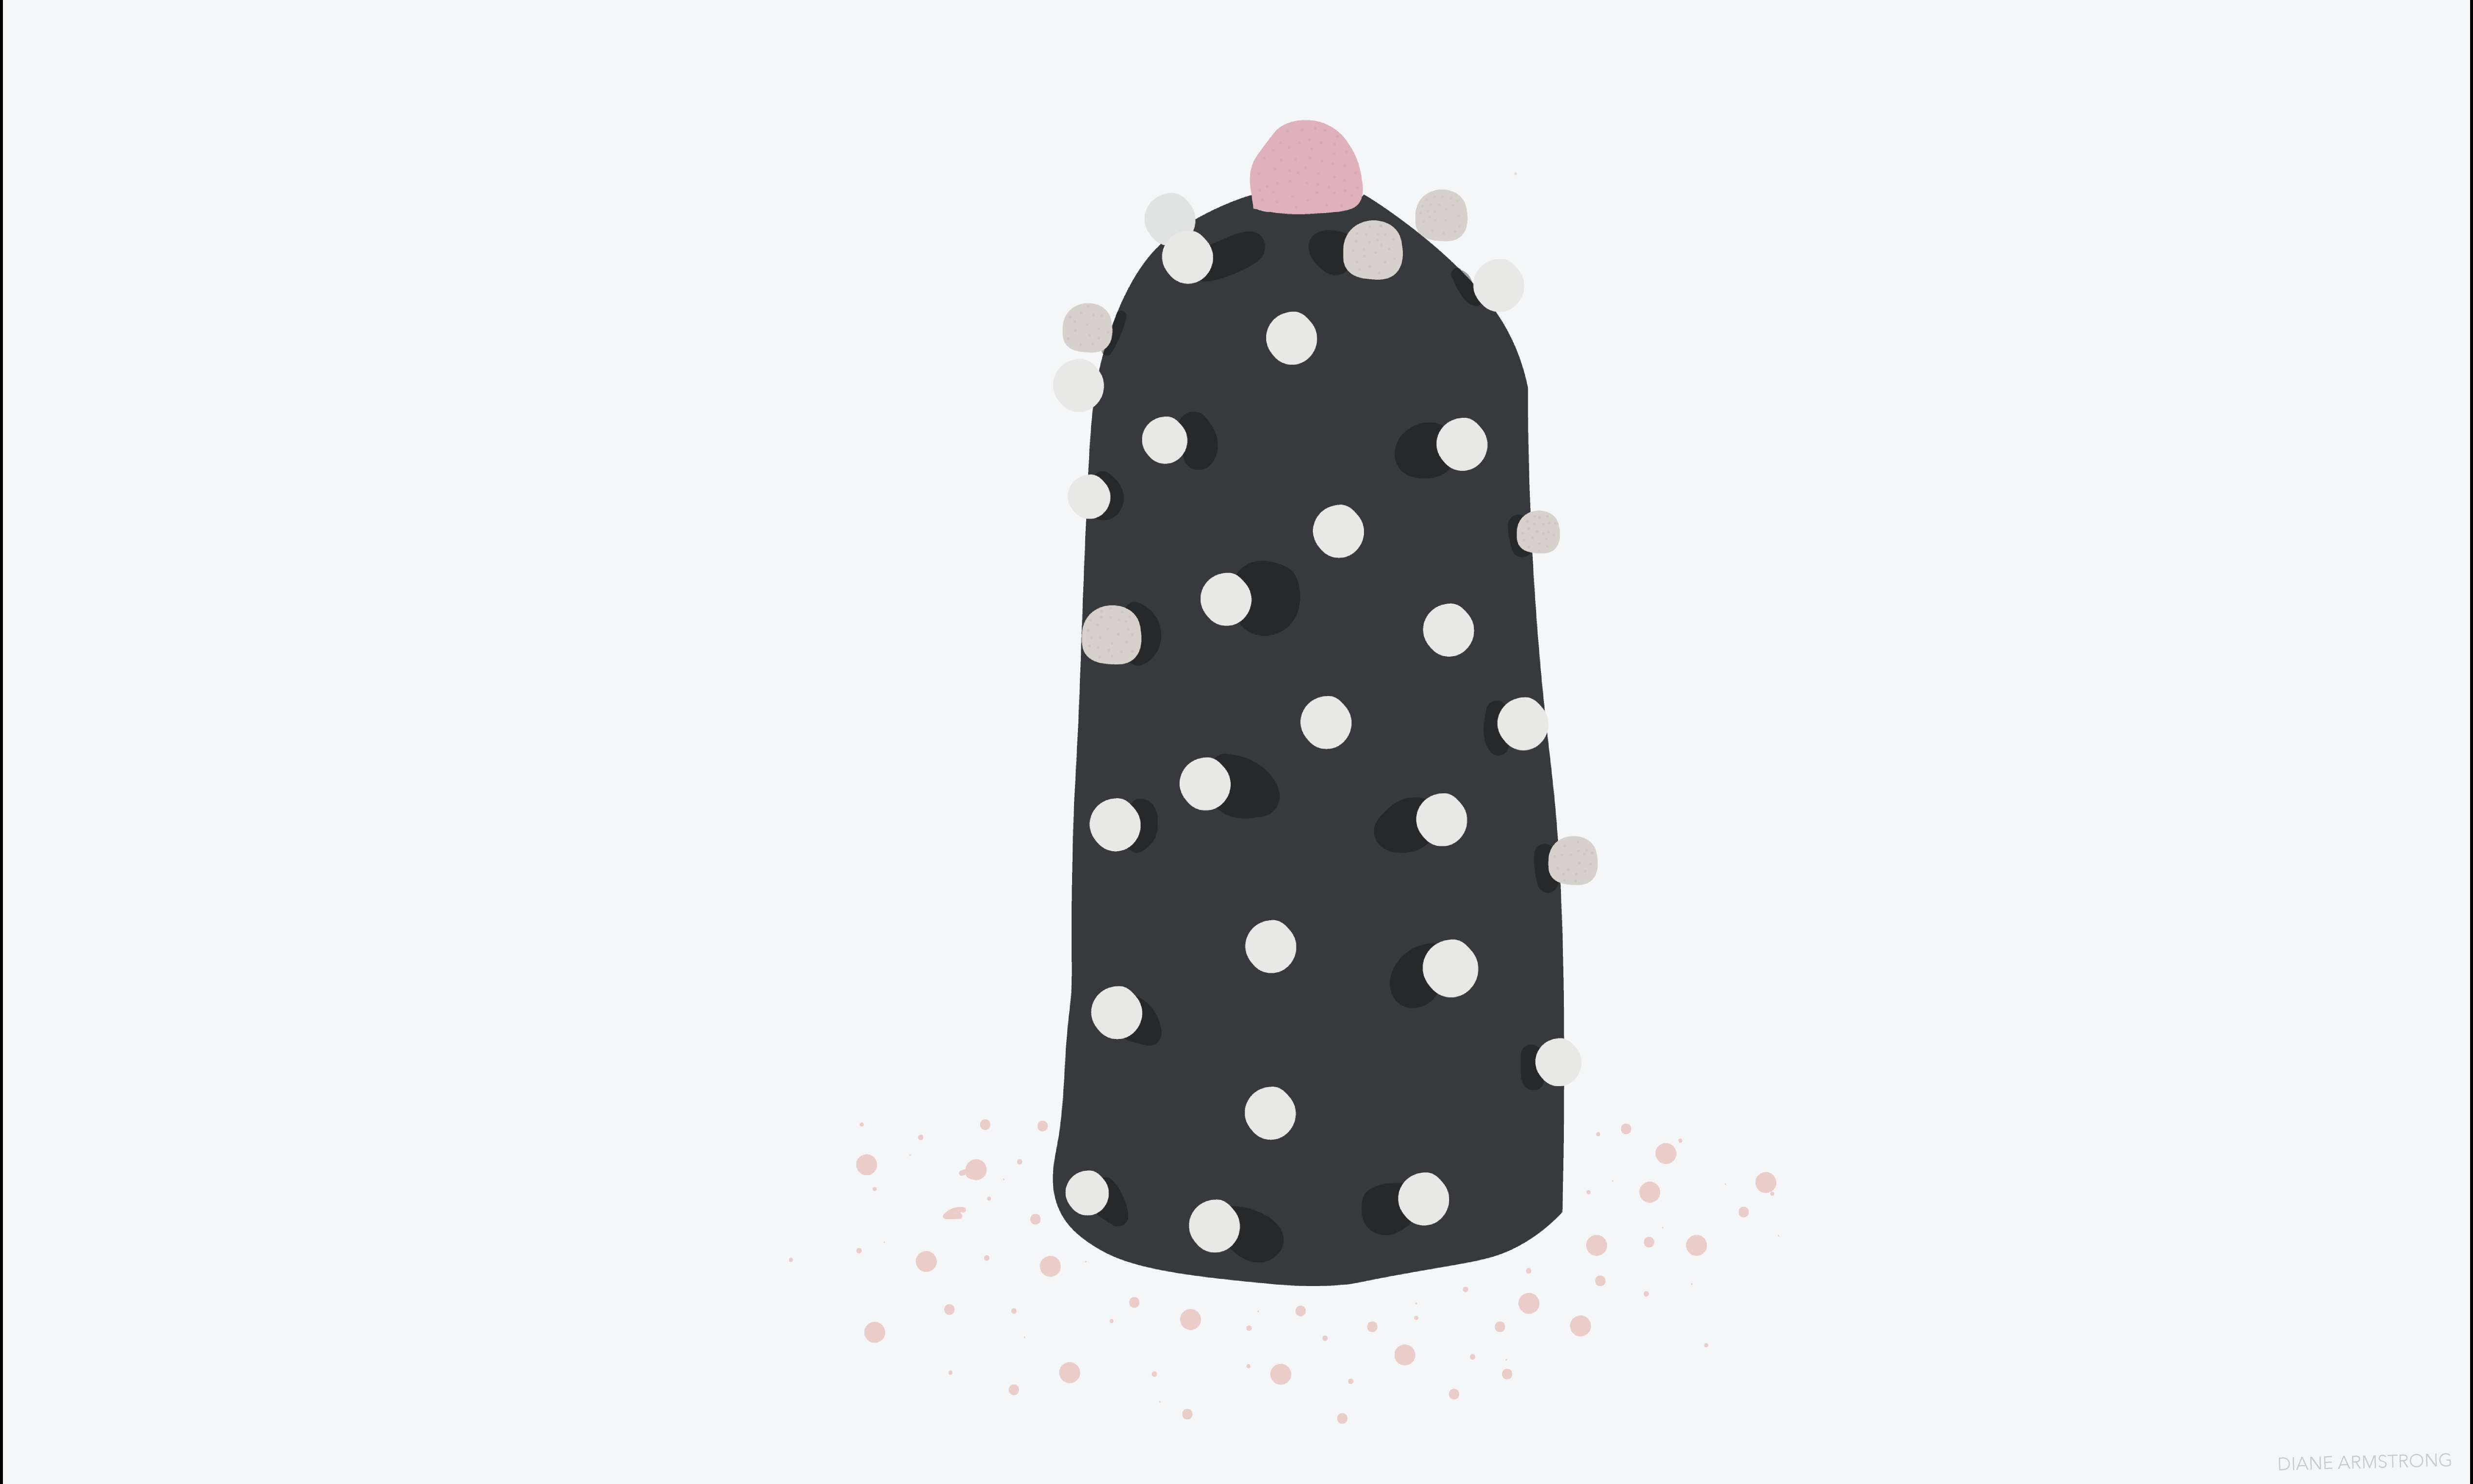 An illustration of tall, black dome shaped ceramic object with white dots scattered across and a larger pink spot on top. 